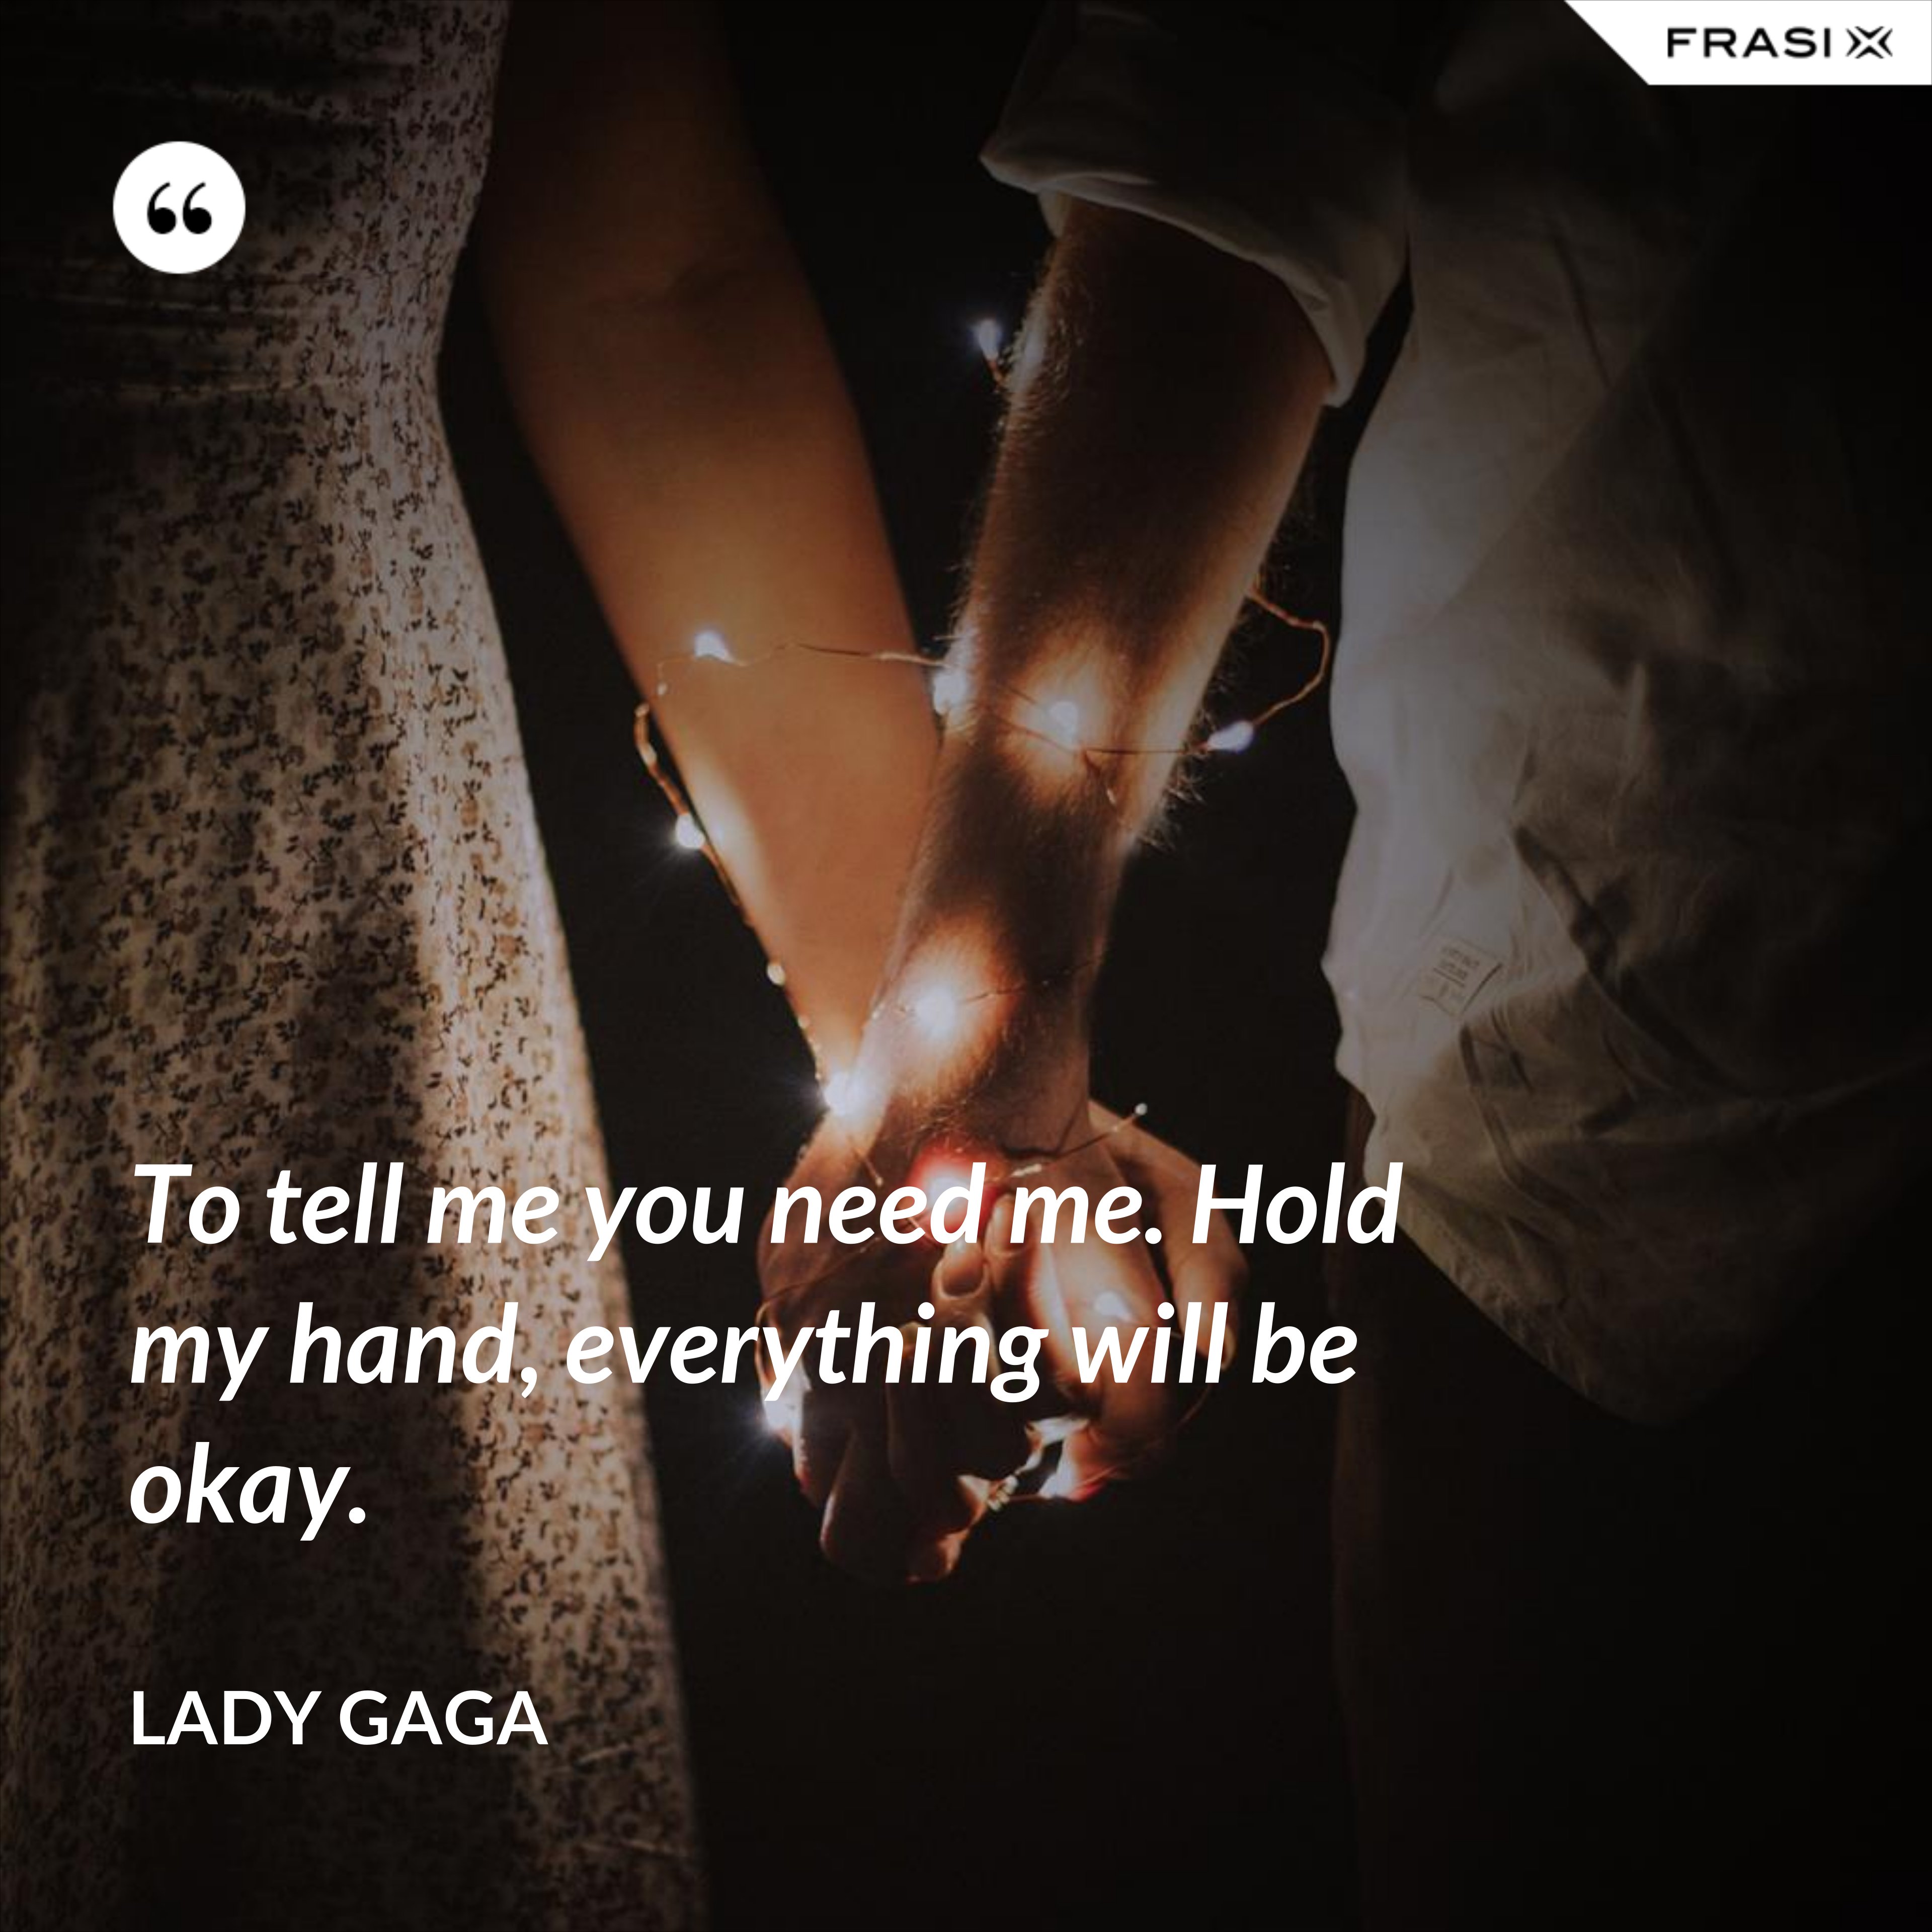 To tell me you need me. Hold my hand, everything will be okay. - Lady Gaga